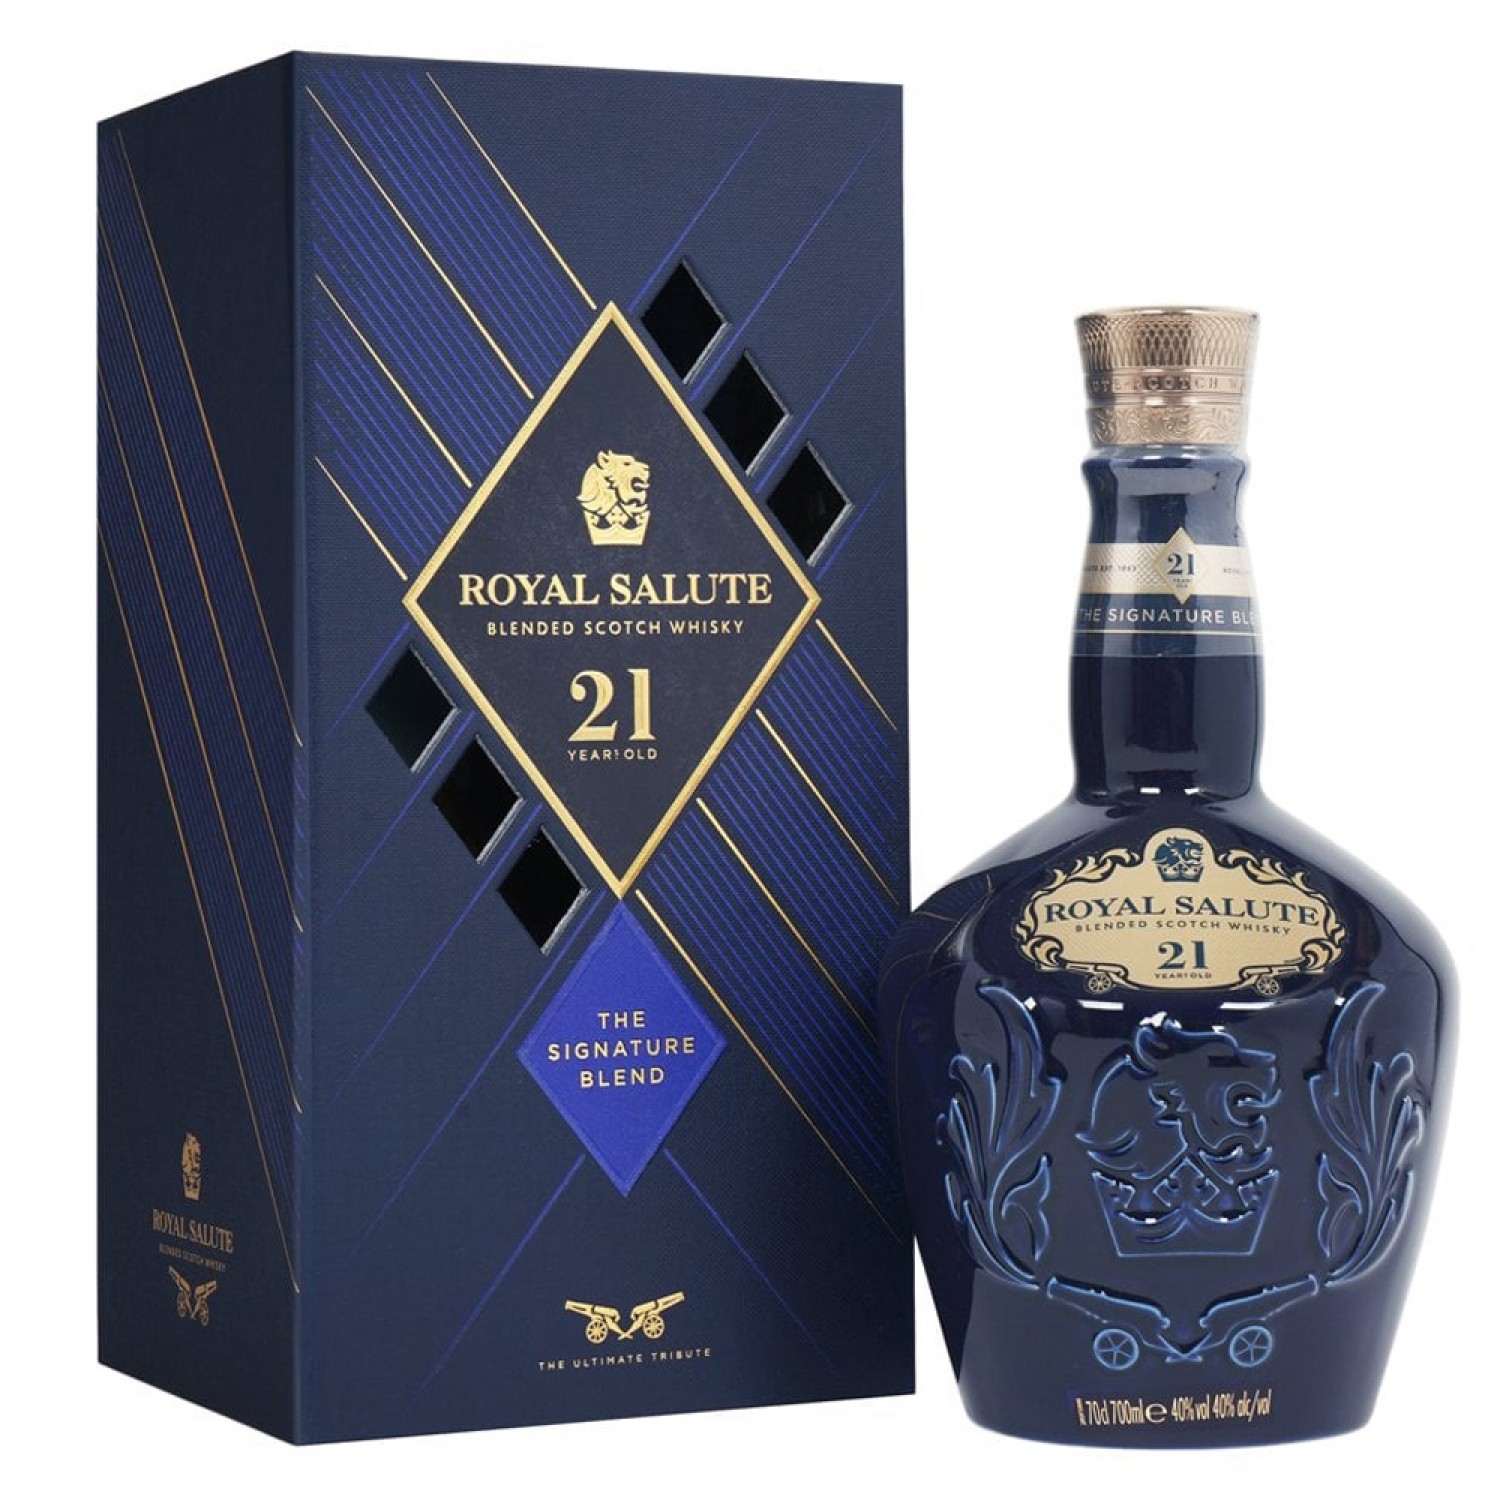 Royal Salute 21 Years Old Blended Scotch Whisky 700ml